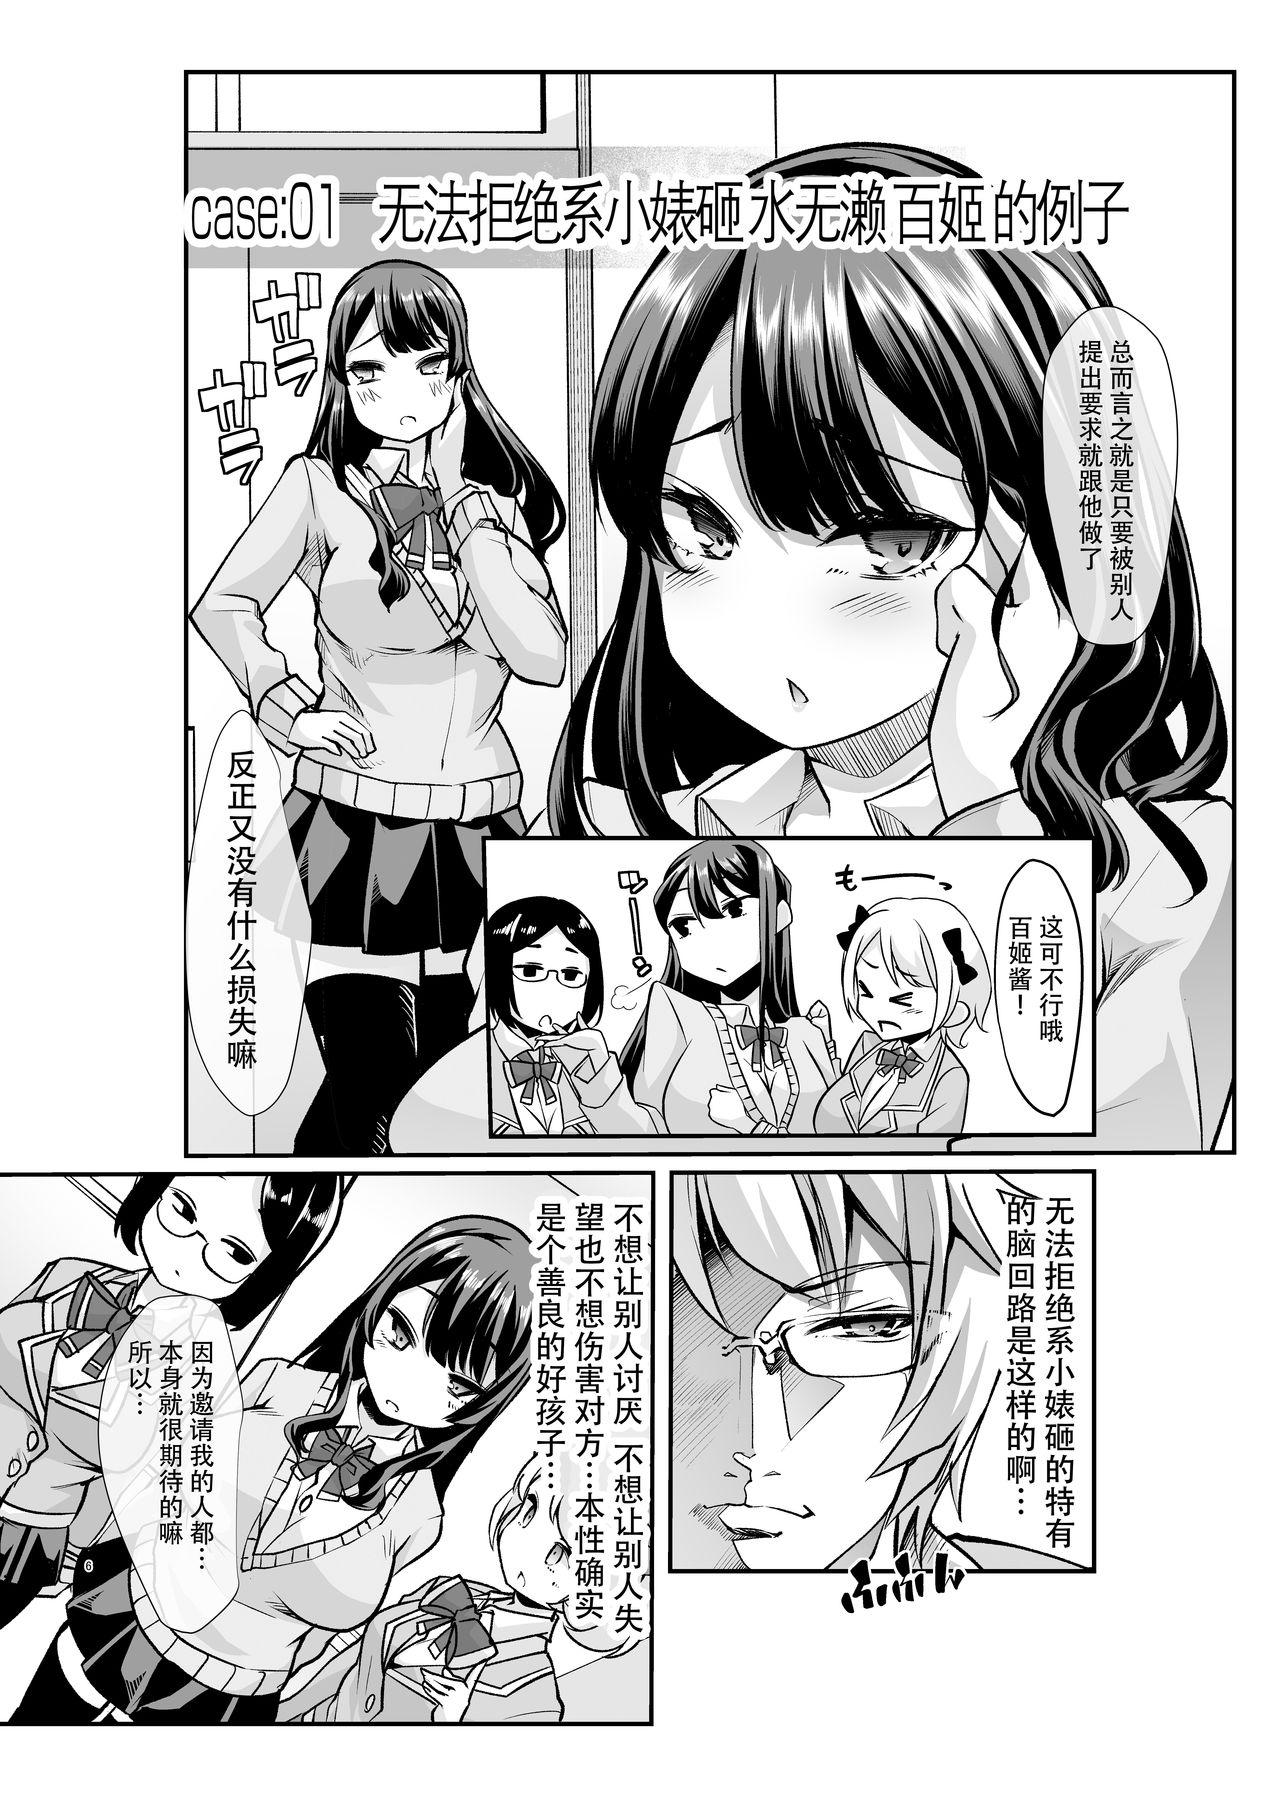 Trannies Any girl can do it! Bitch Zukan-I could have a harem if I solved various problems of Saseko～ - Original Negro - Page 6